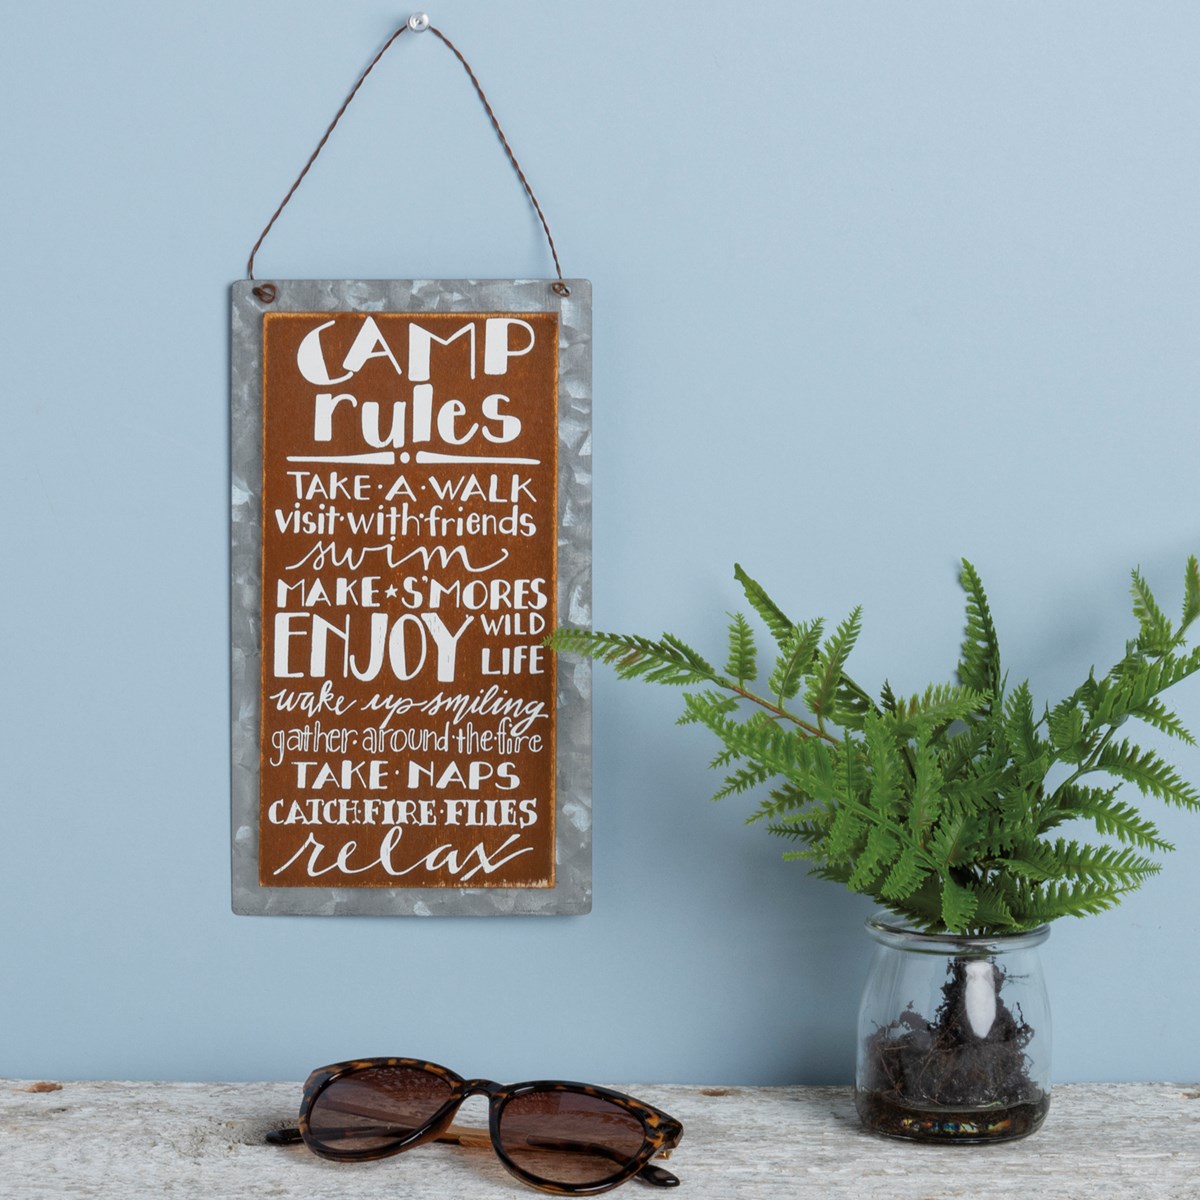 Camp Rules Hanging Decor - Wood, Metal, Wire